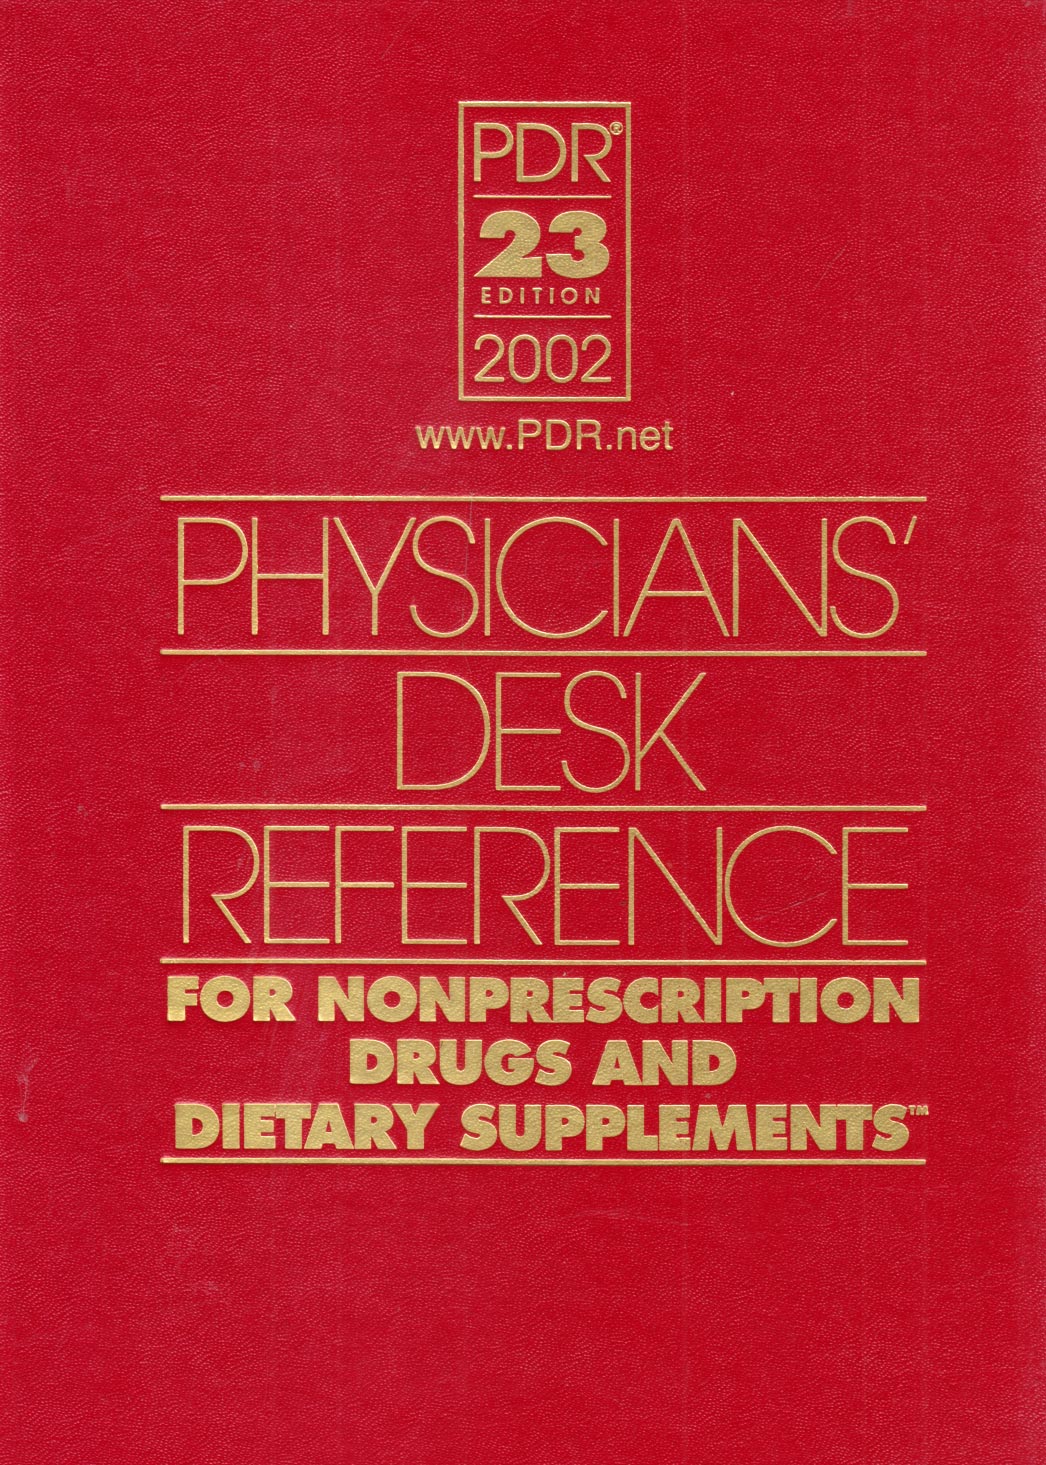 Physicians S Desk Reference For Nonprescription Drugs And Dietary